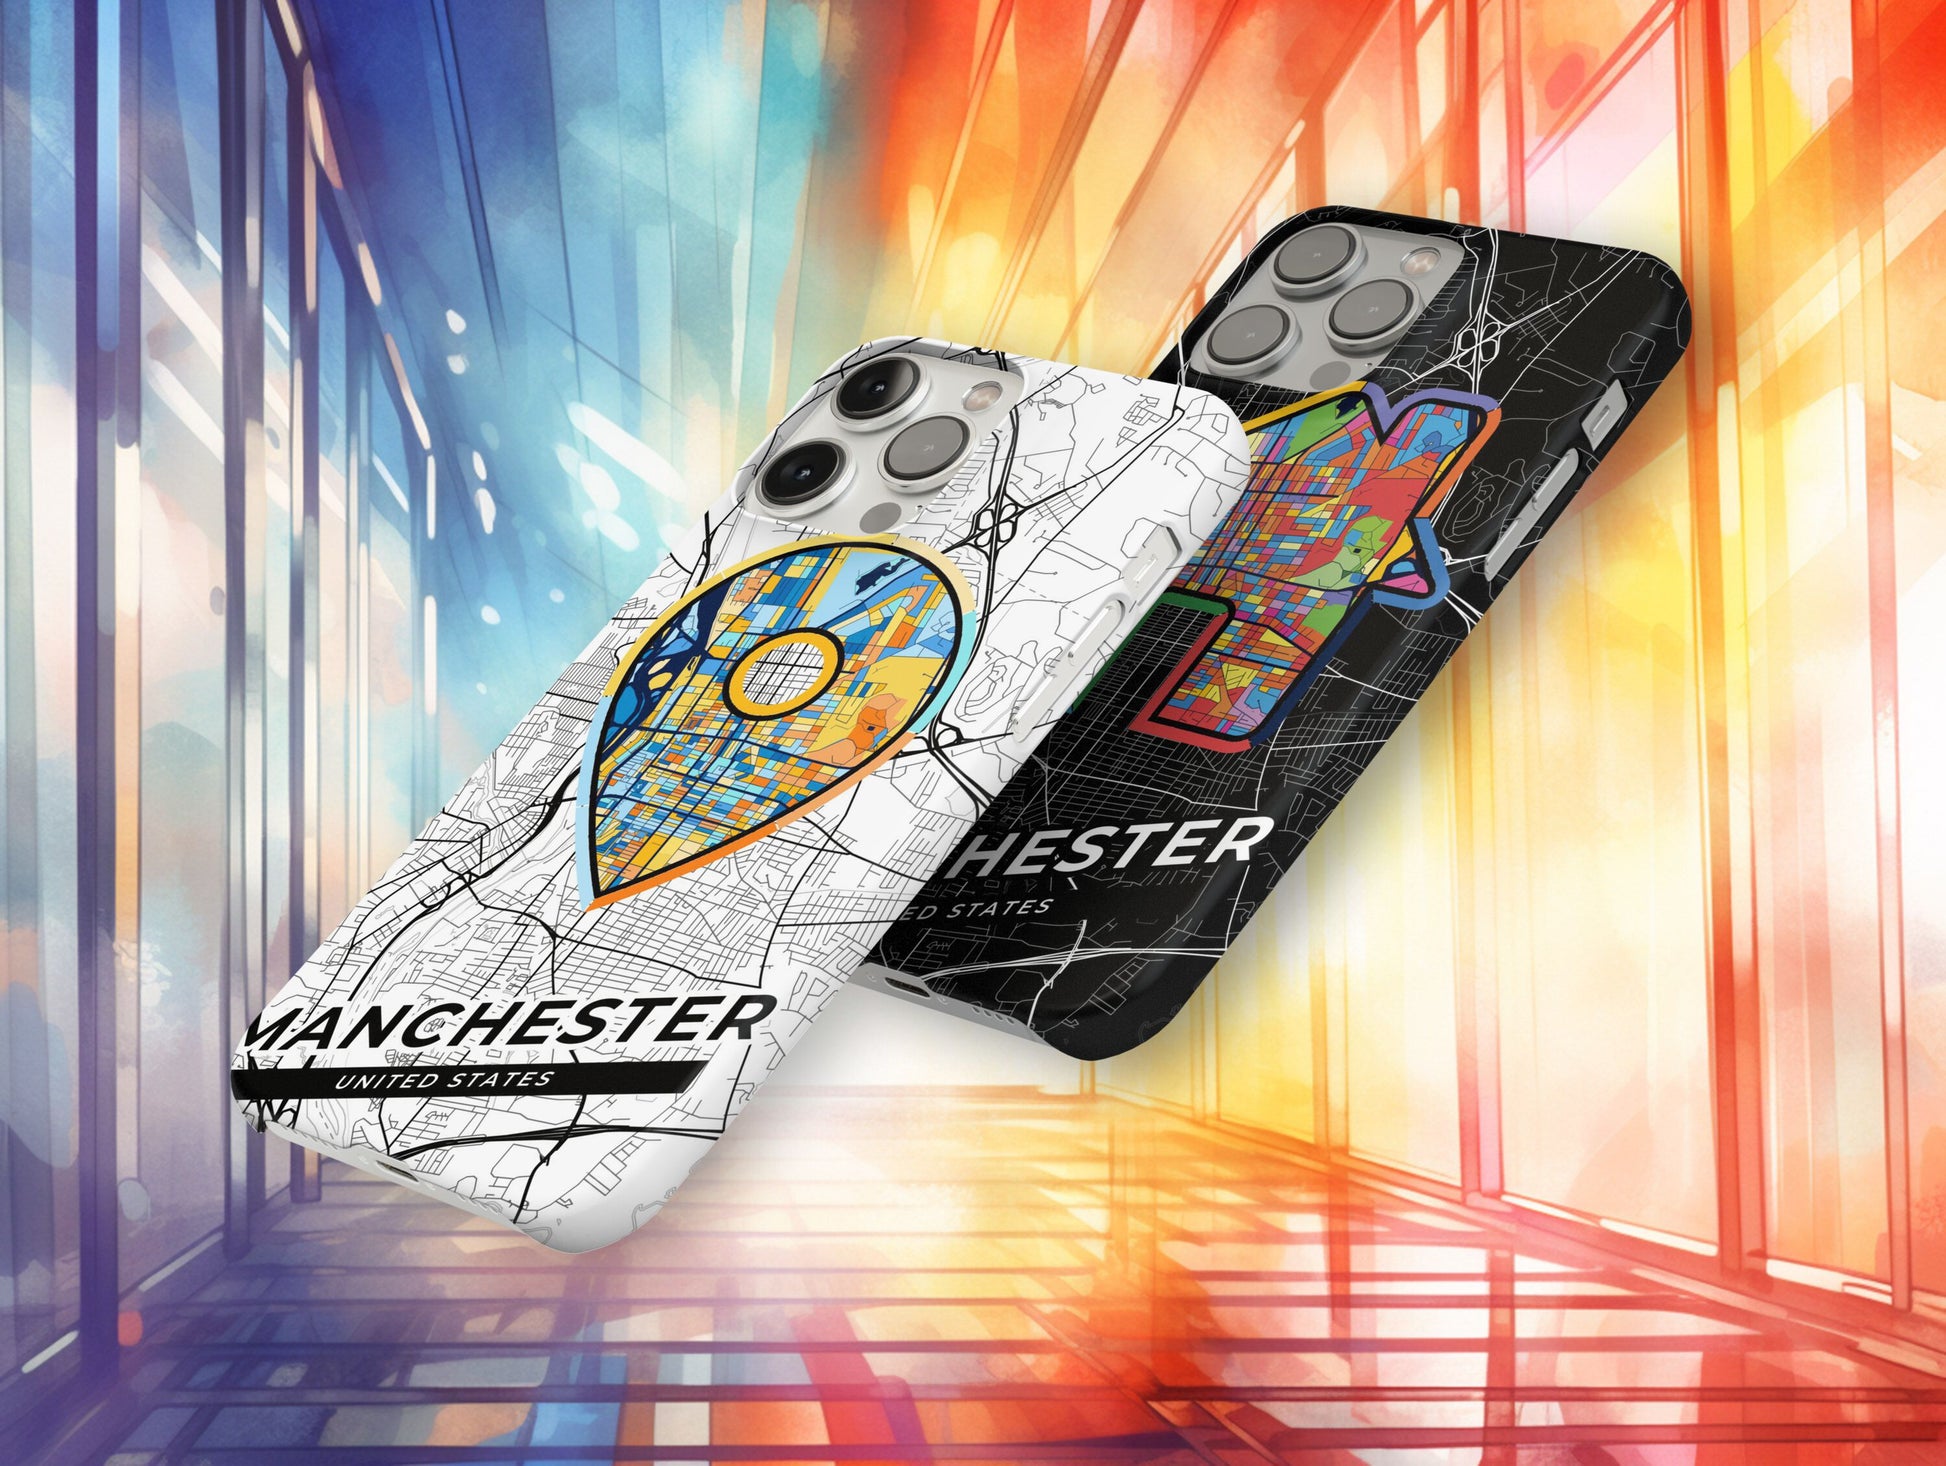 Manchester New Hampshire slim phone case with colorful icon. Birthday, wedding or housewarming gift. Couple match cases.